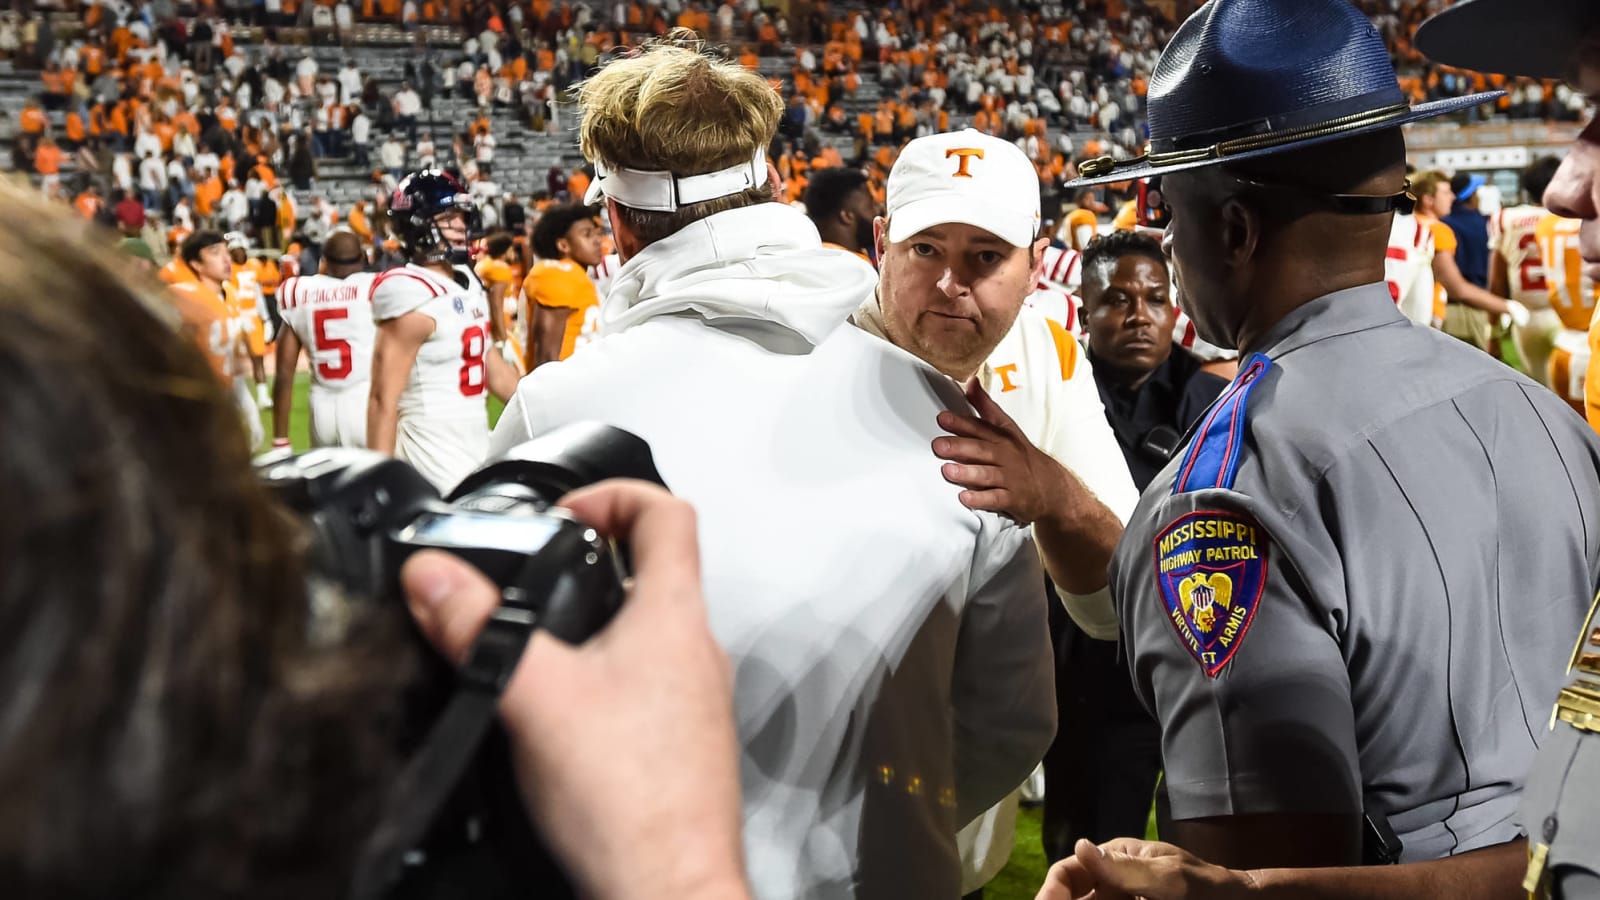 Tennessee football fans were upset over fourth-down call, defensive TD lost